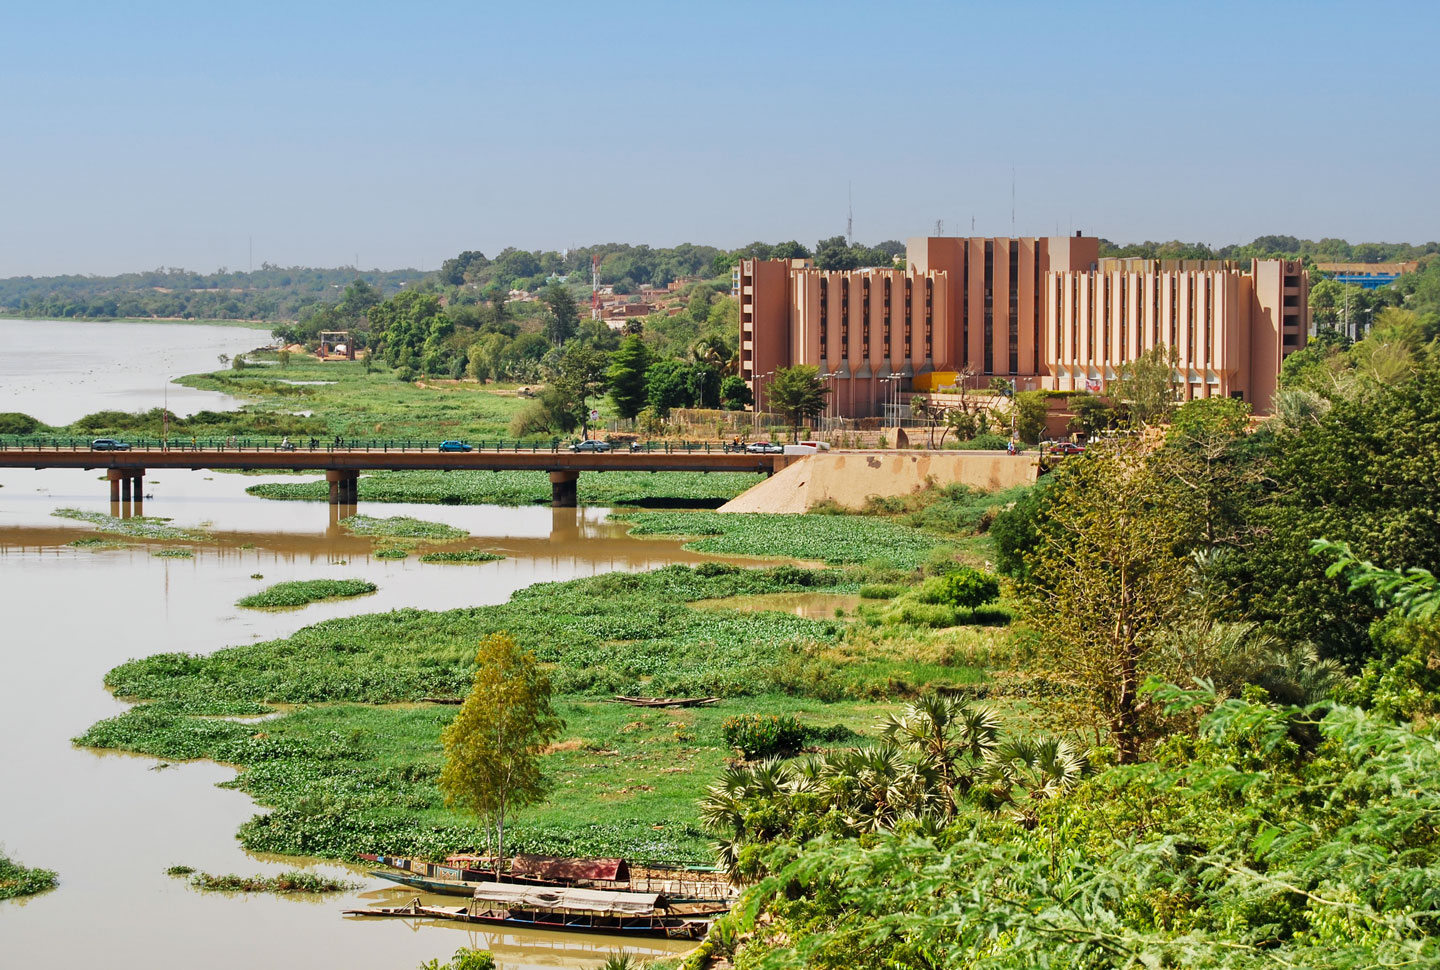 Niamey, Niger's capital on the Niger River